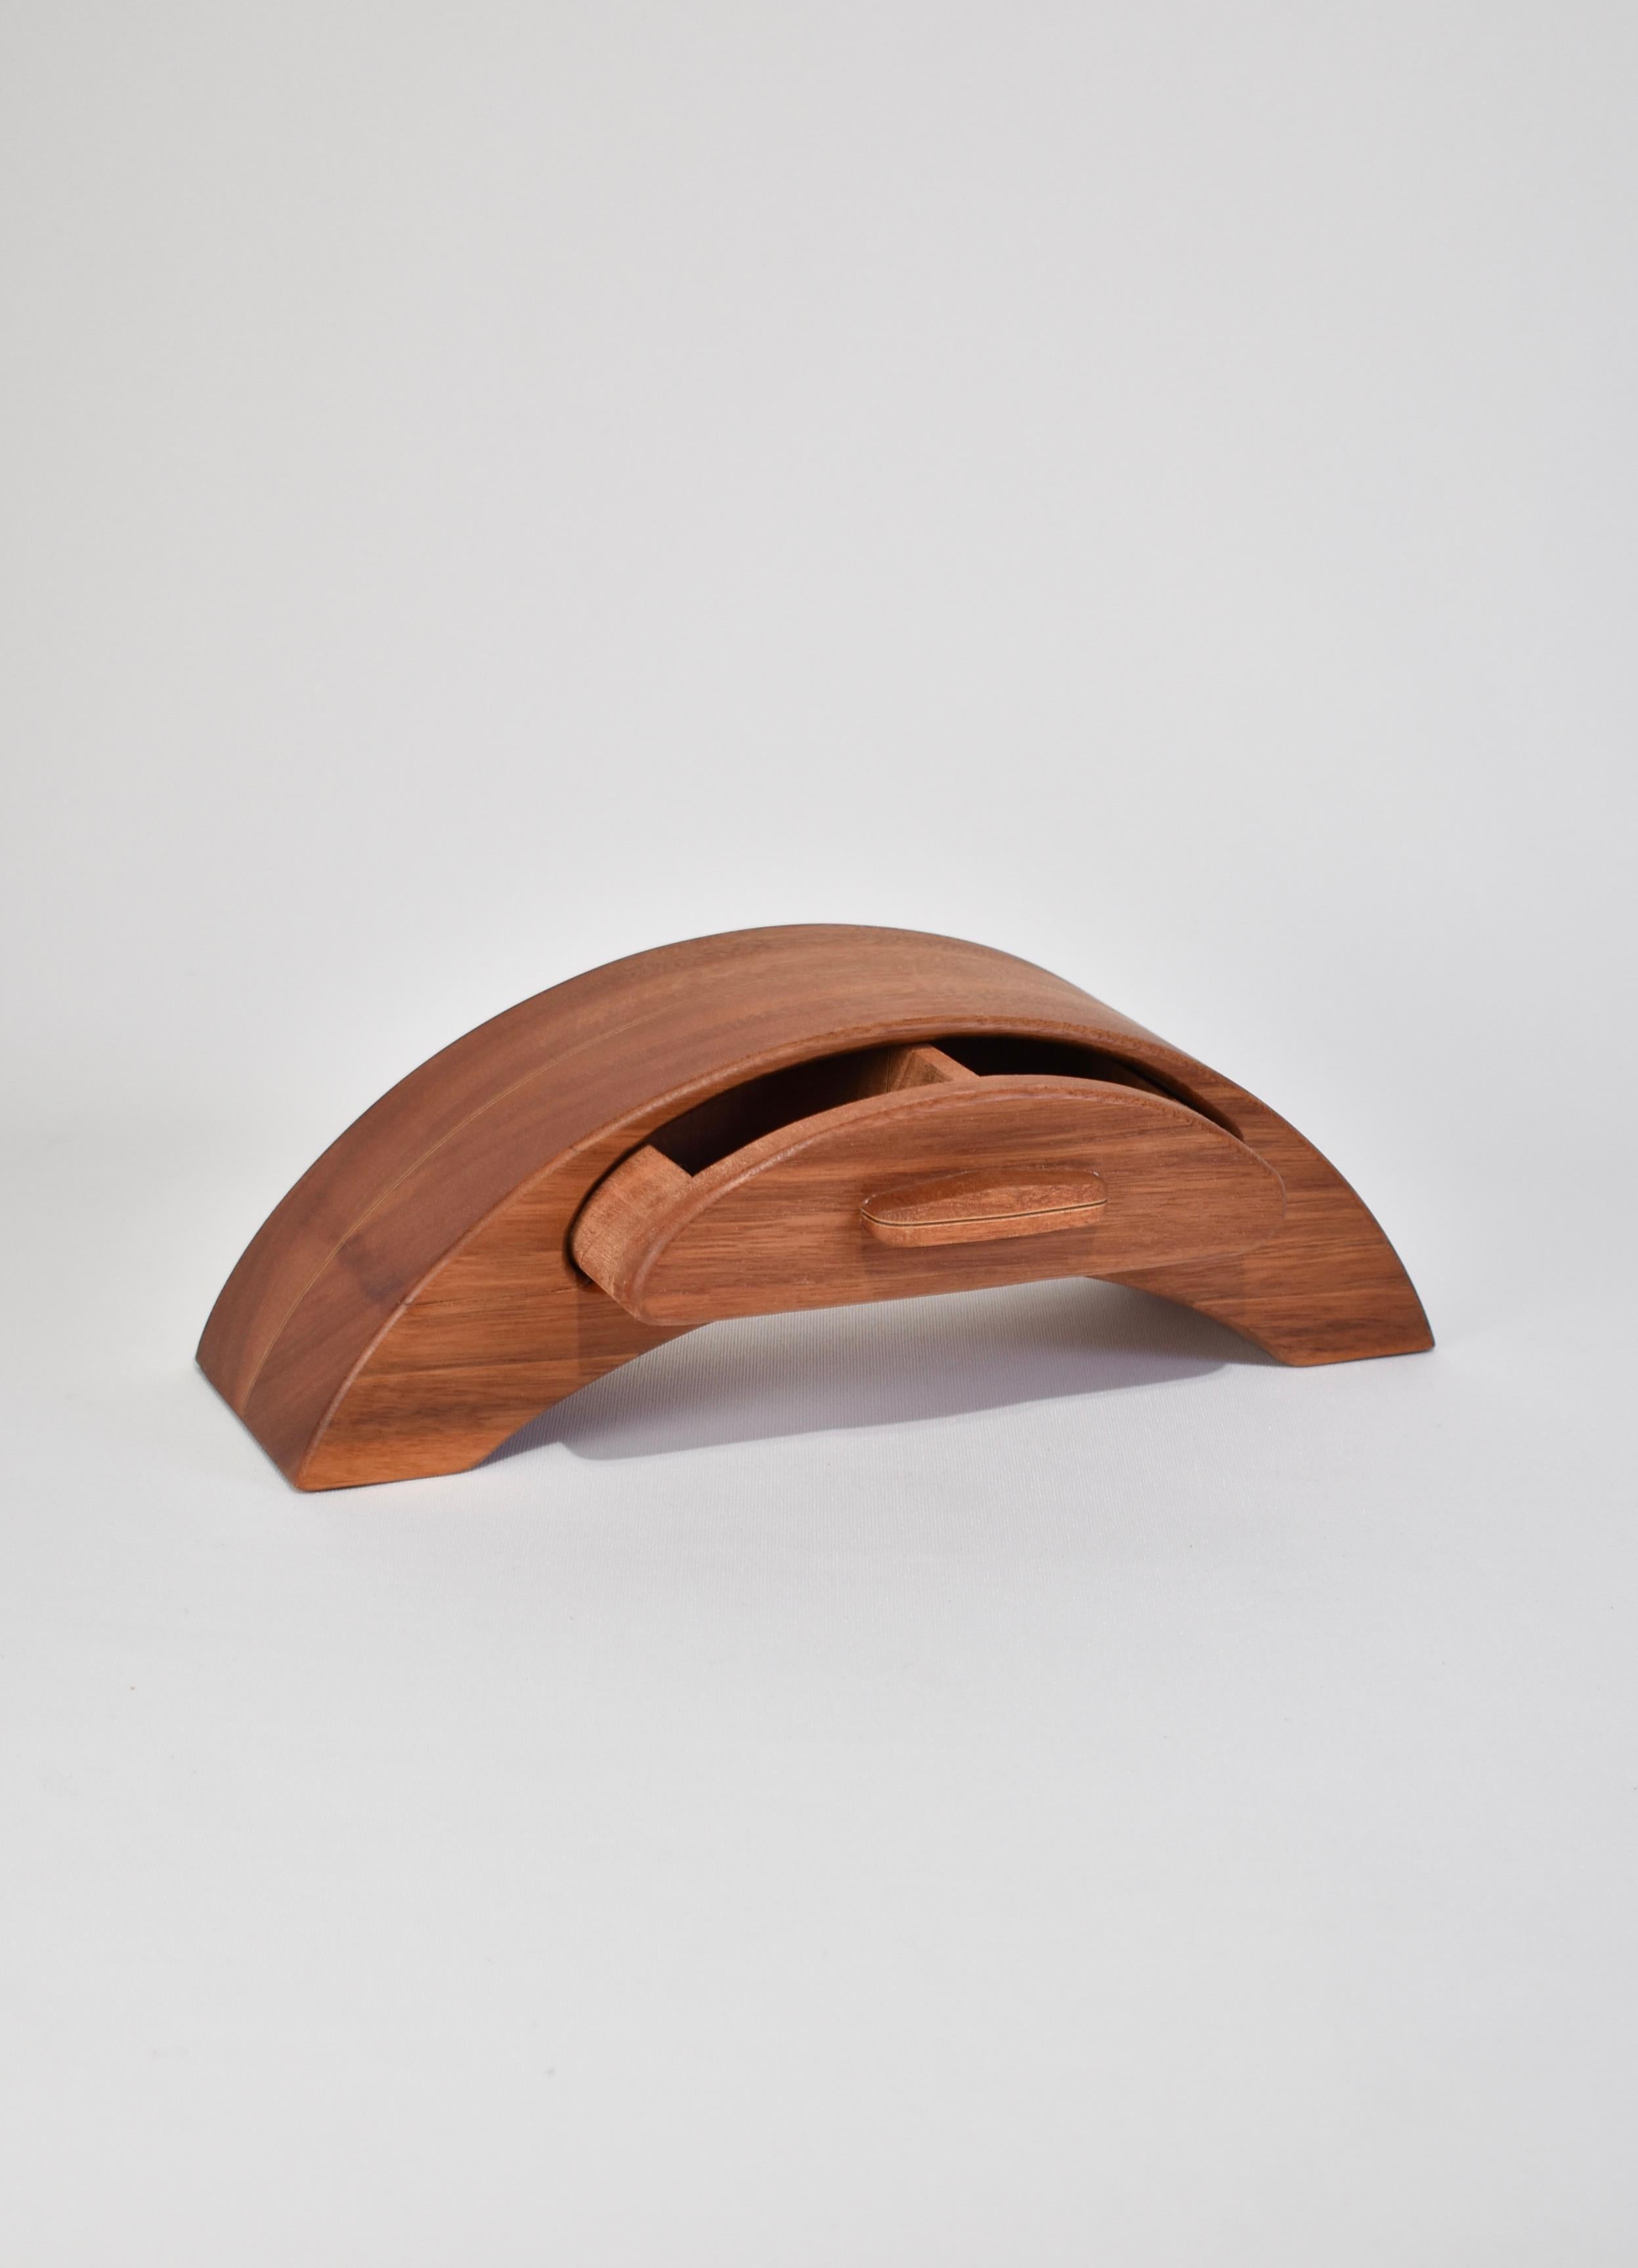 Hand-Carved Curved Wooden Jewelry Box